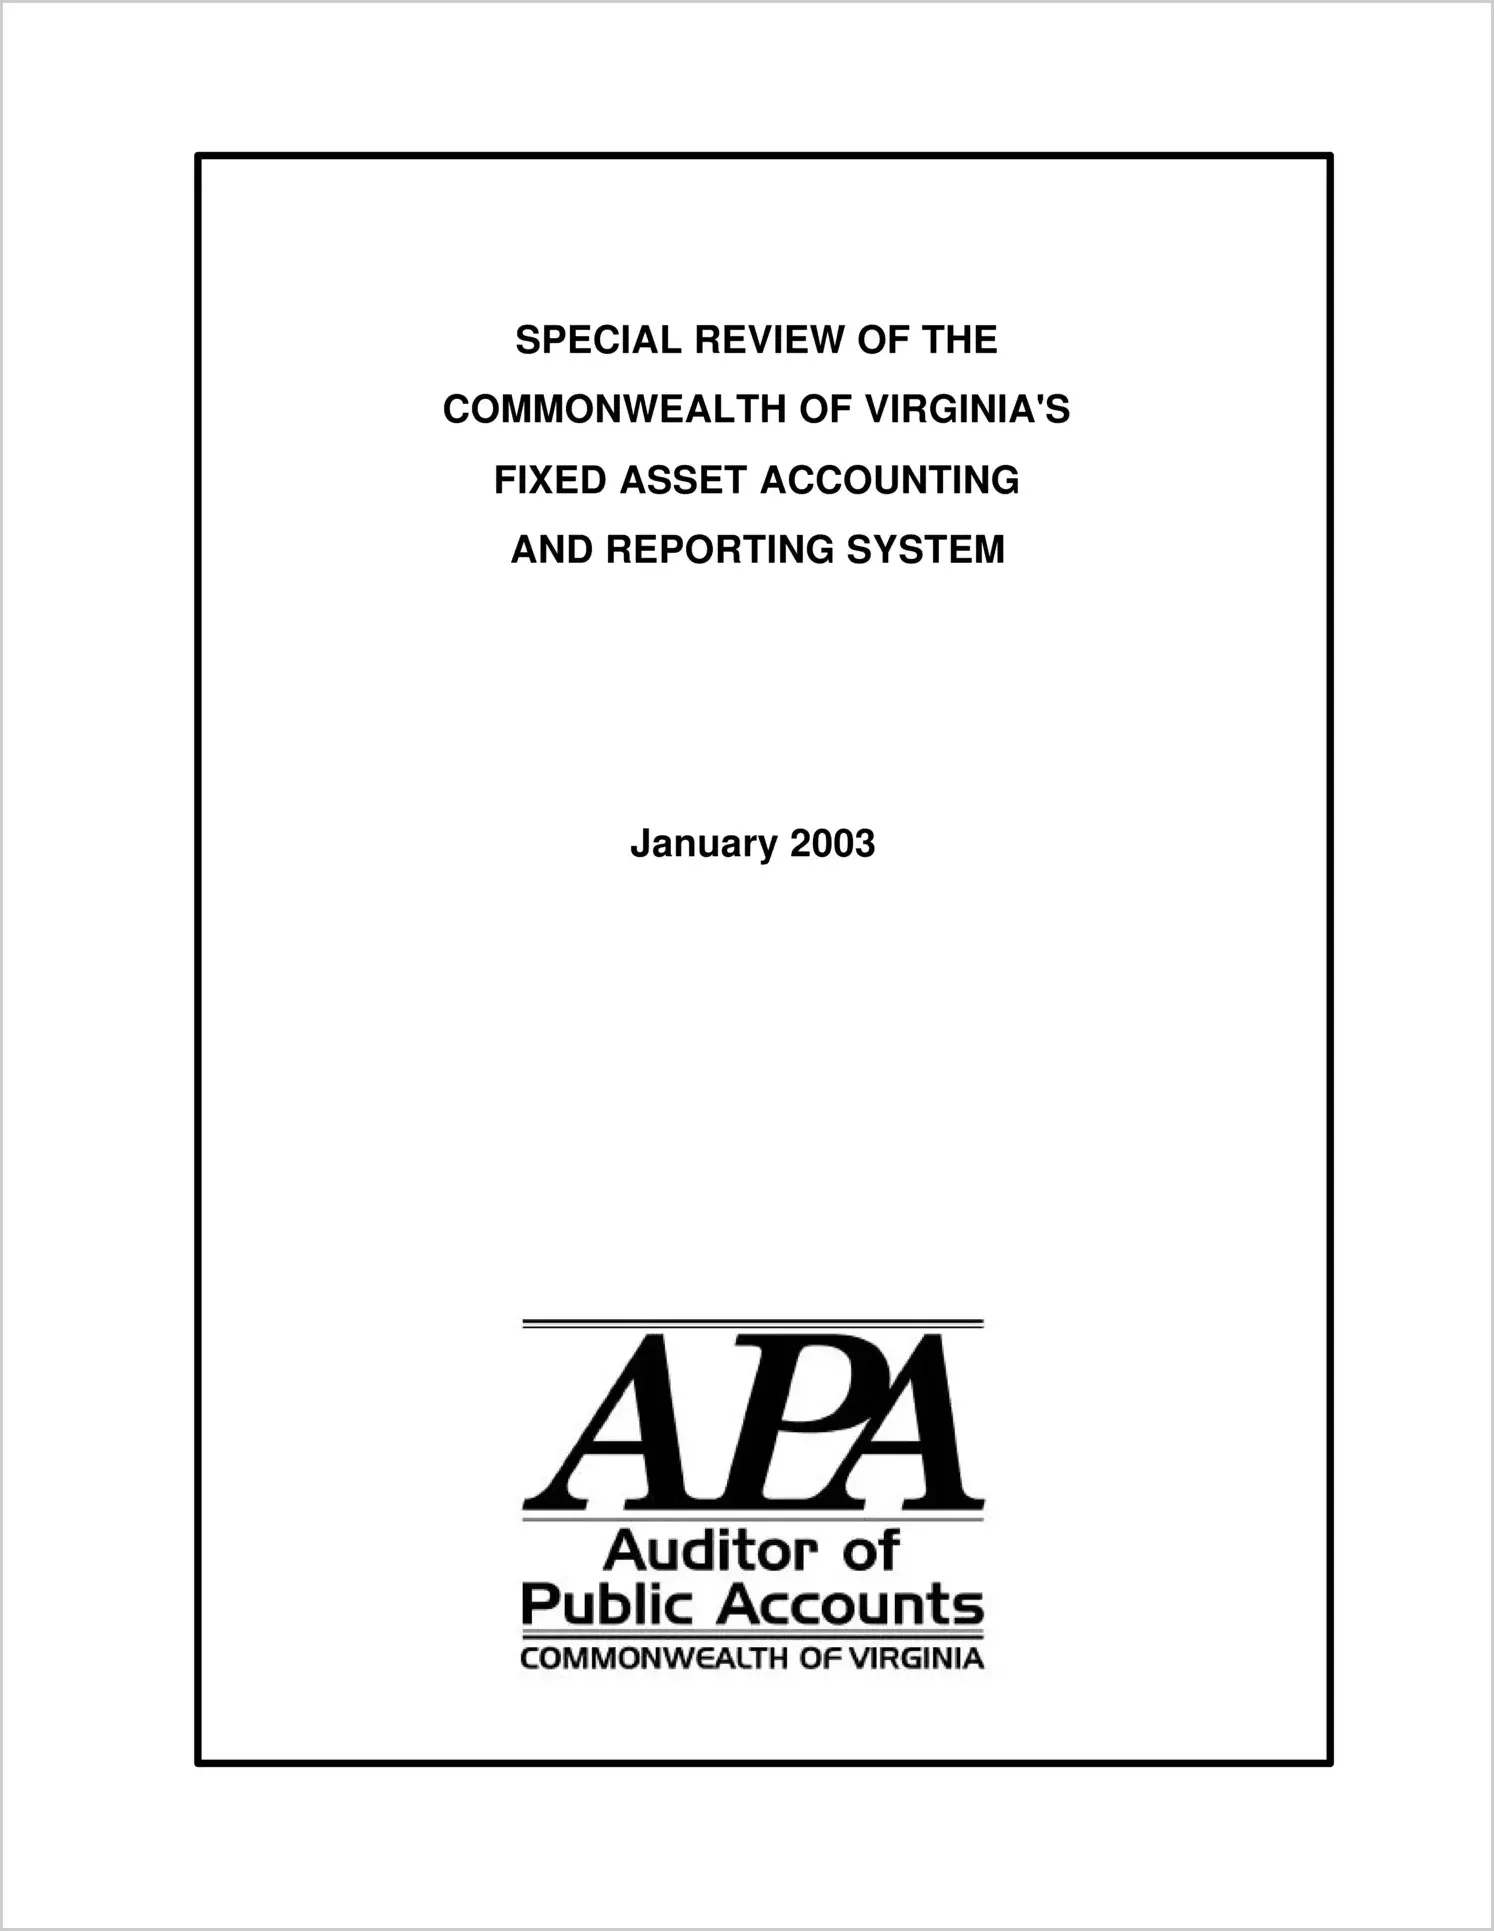 Special ReportSpecial Review of the Commonwealth of Virginia`s Fixed Asset Accounting and Reporting System(Report Date: January 2003)